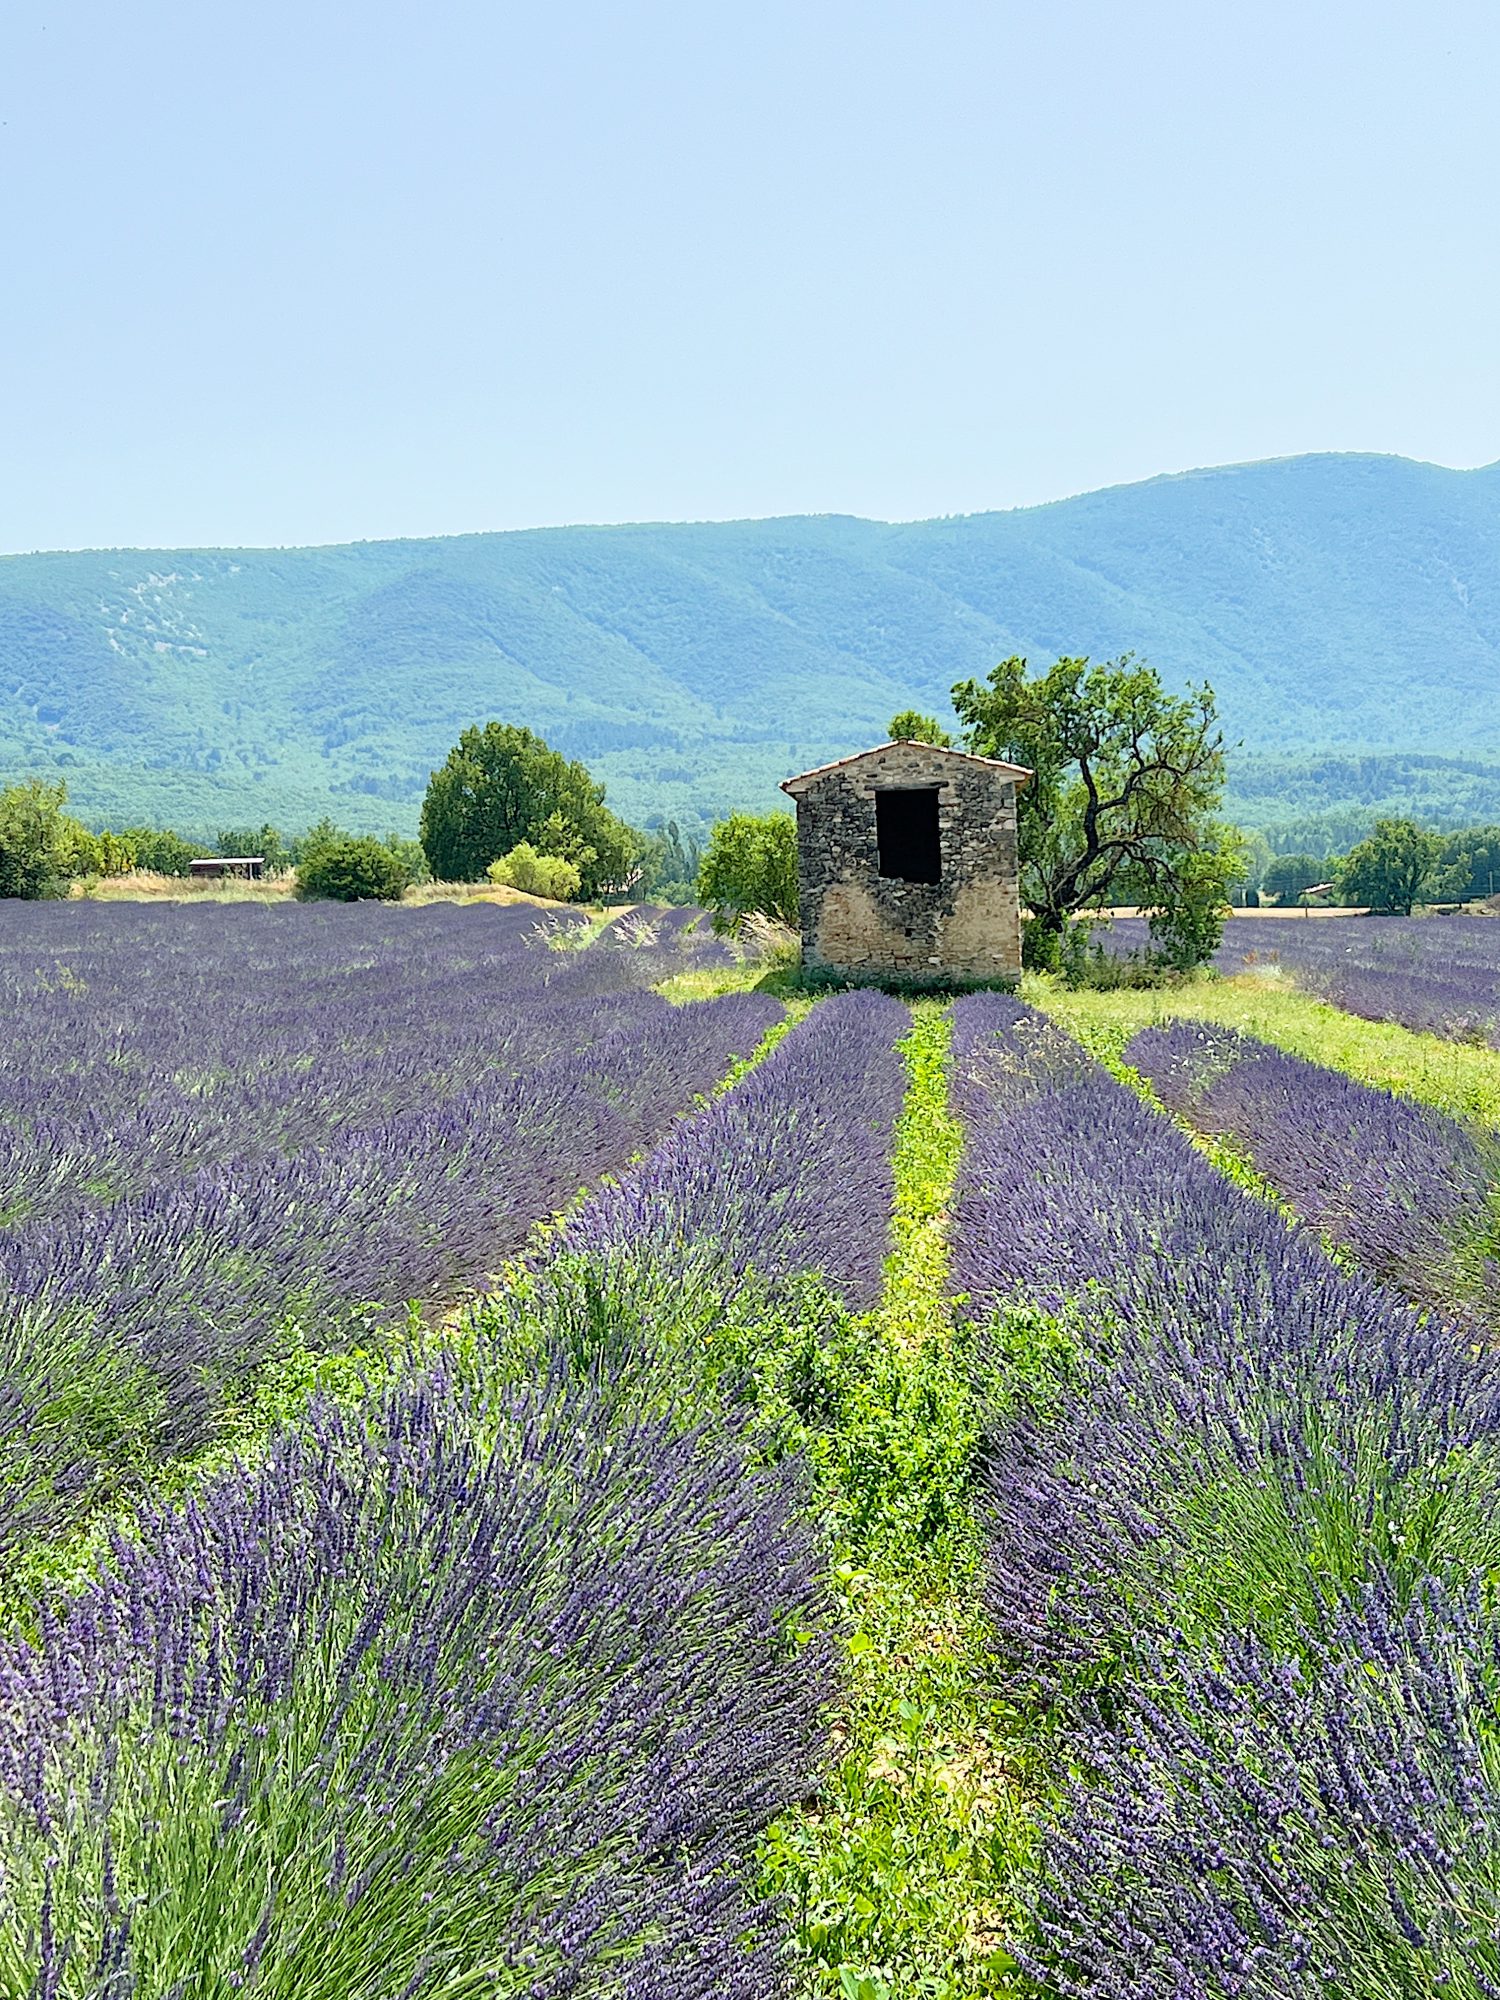 French Lavender and a Brocante Store